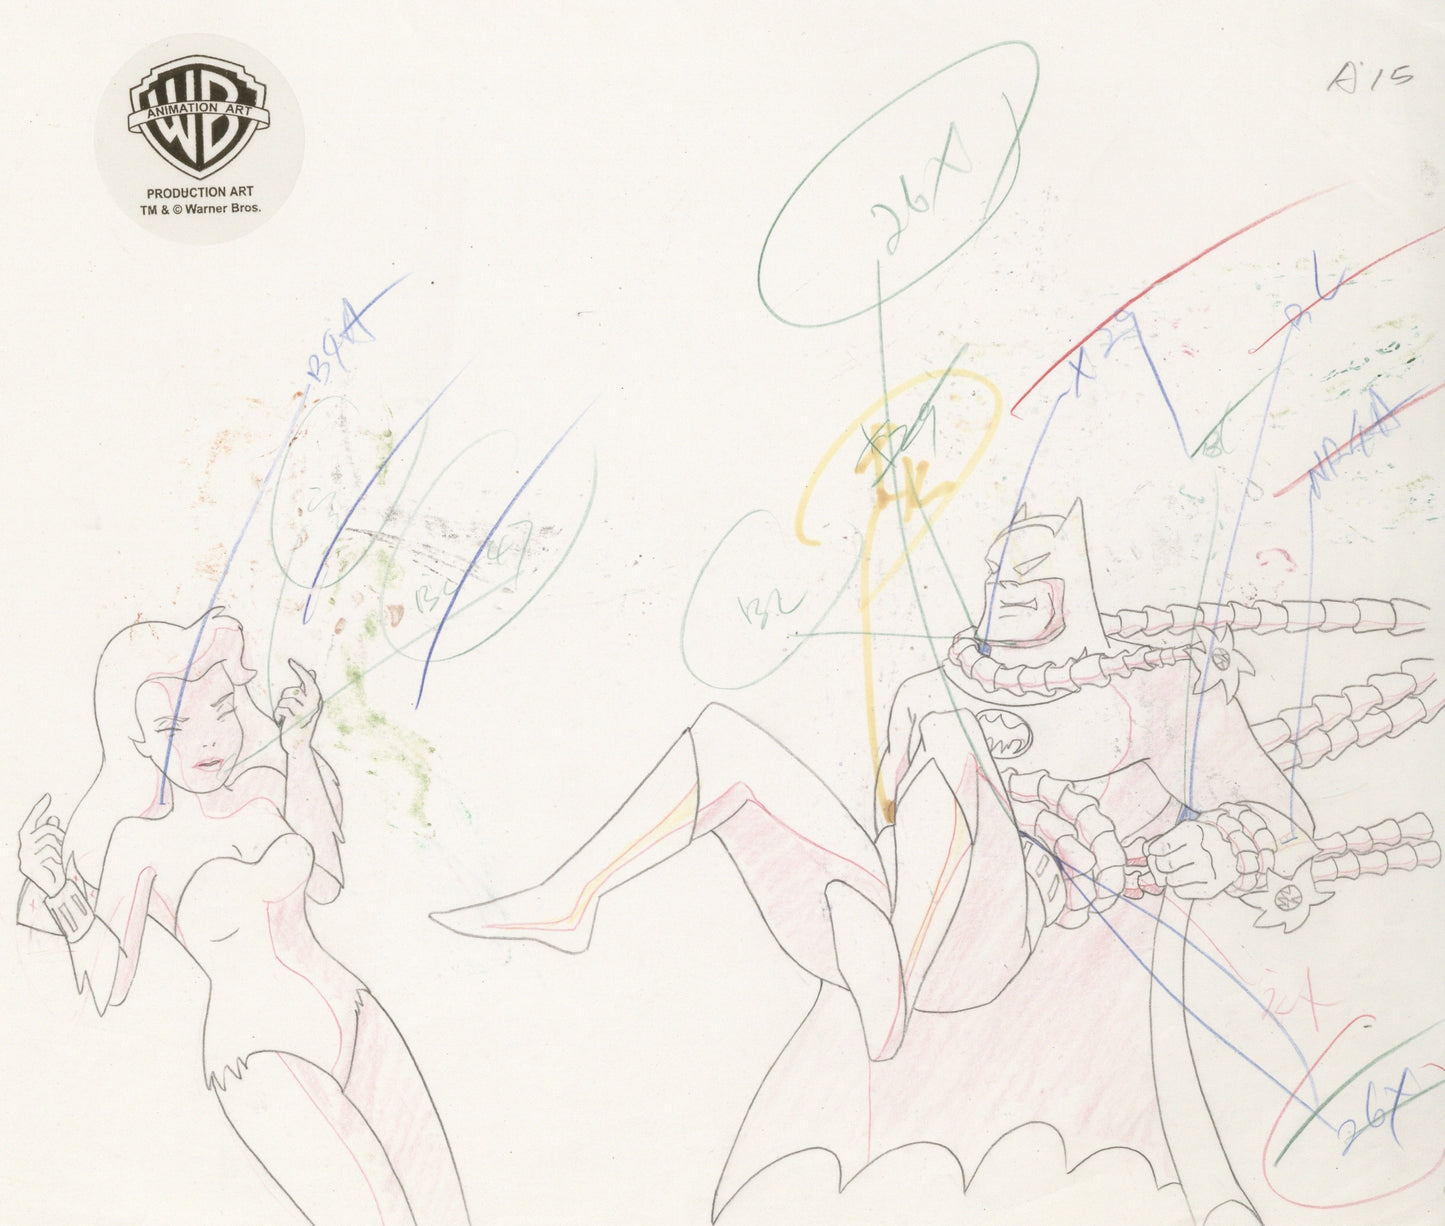 Batman The Animated Series Original Production Drawing: Batman and Poison Ivy